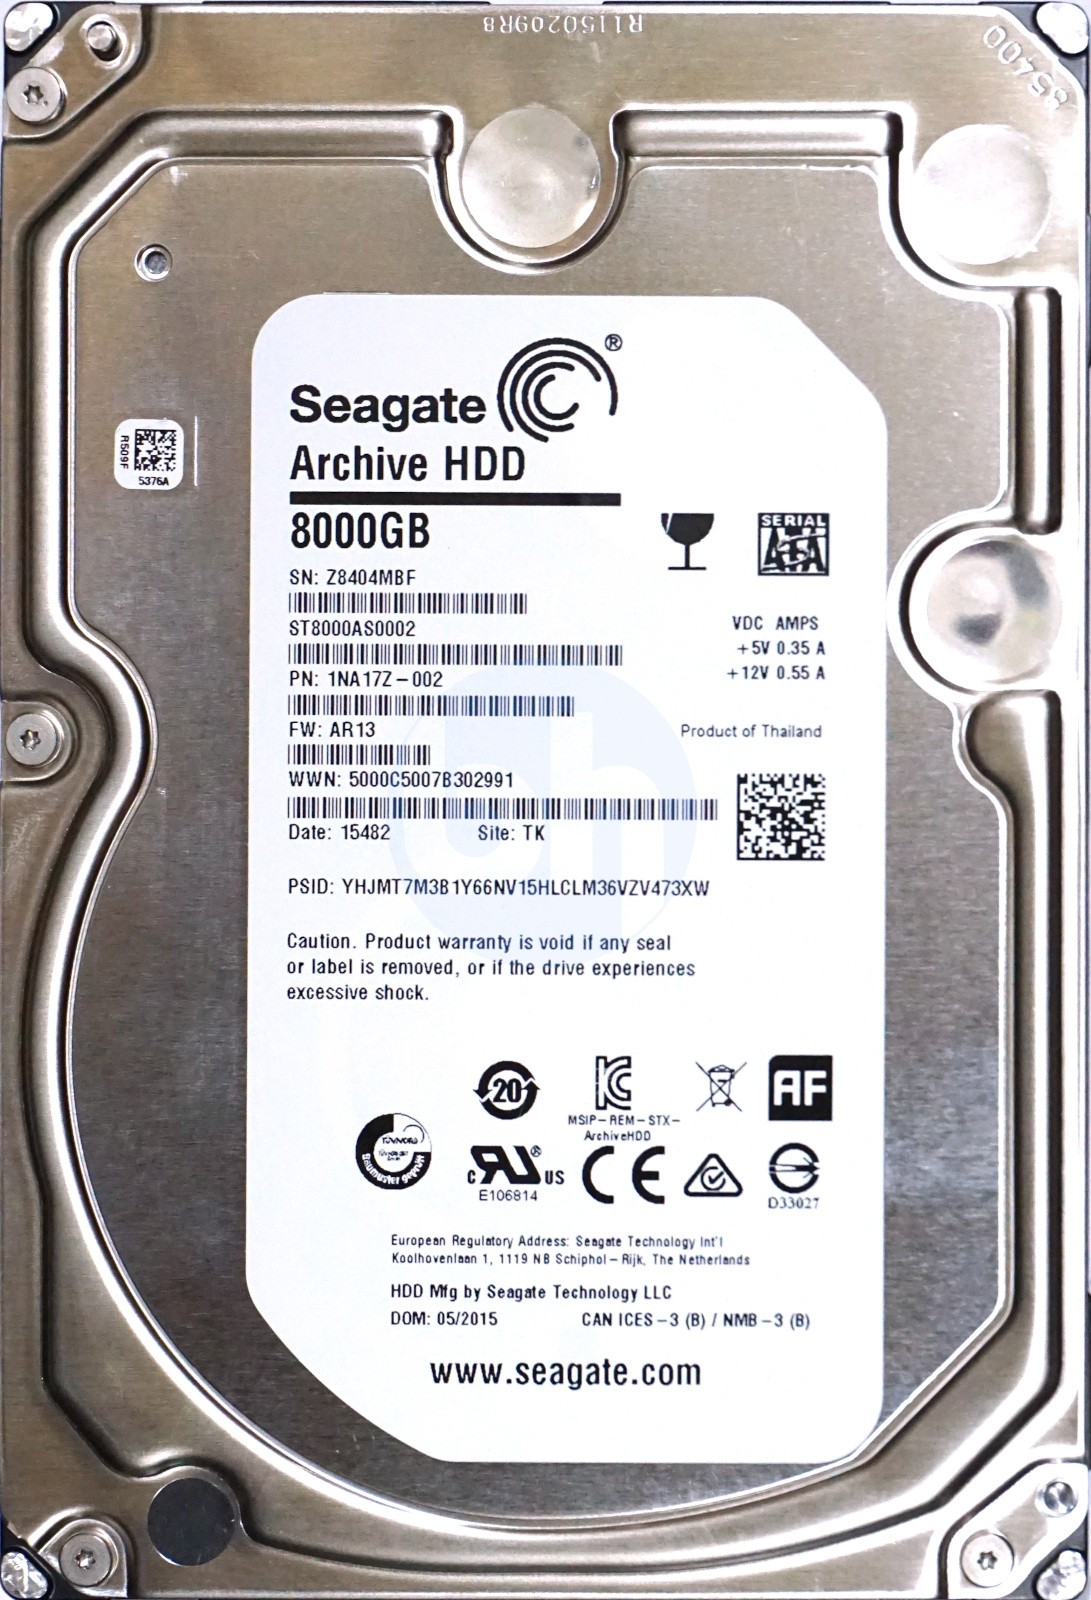 Seagate Archive HDD 8TB SATA 6GBps 128MB Cache SATA Hard Drive  (ST8000AS0002)